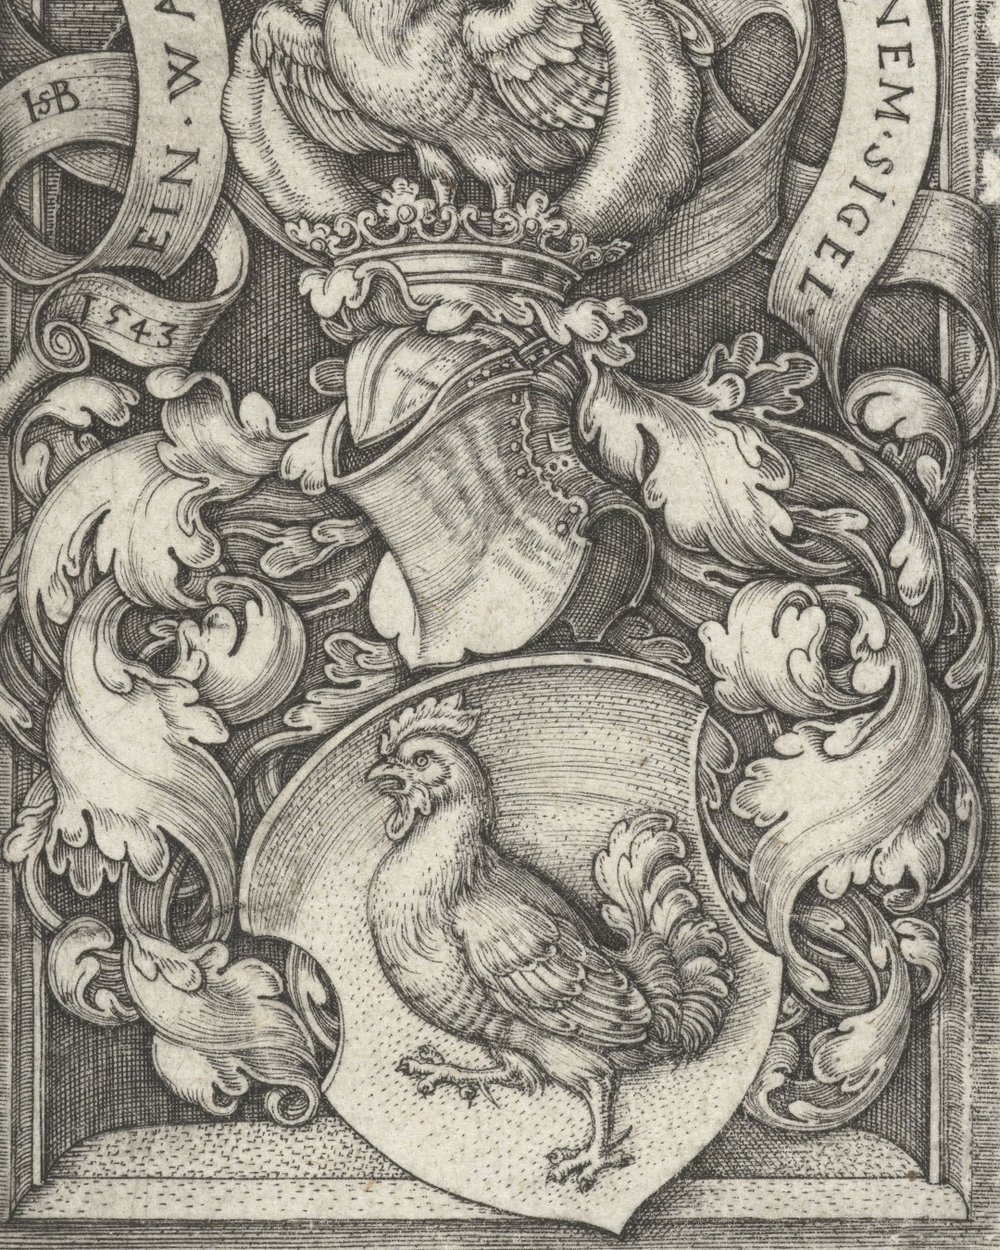 ''Weapon with an eagle on a shield'' (1543)